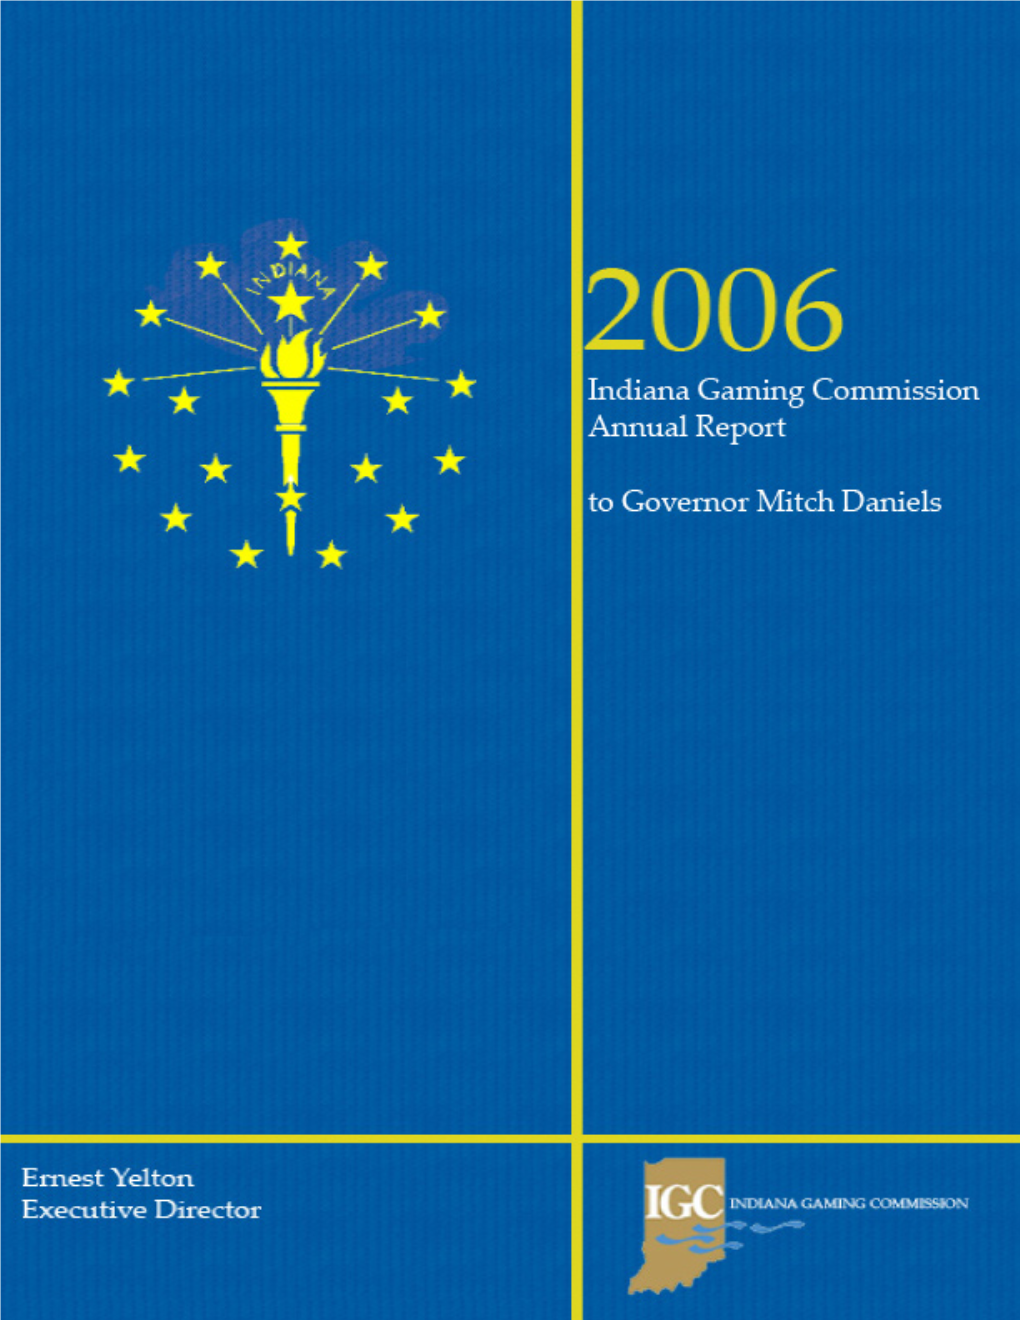 FY 2006 Annual Report